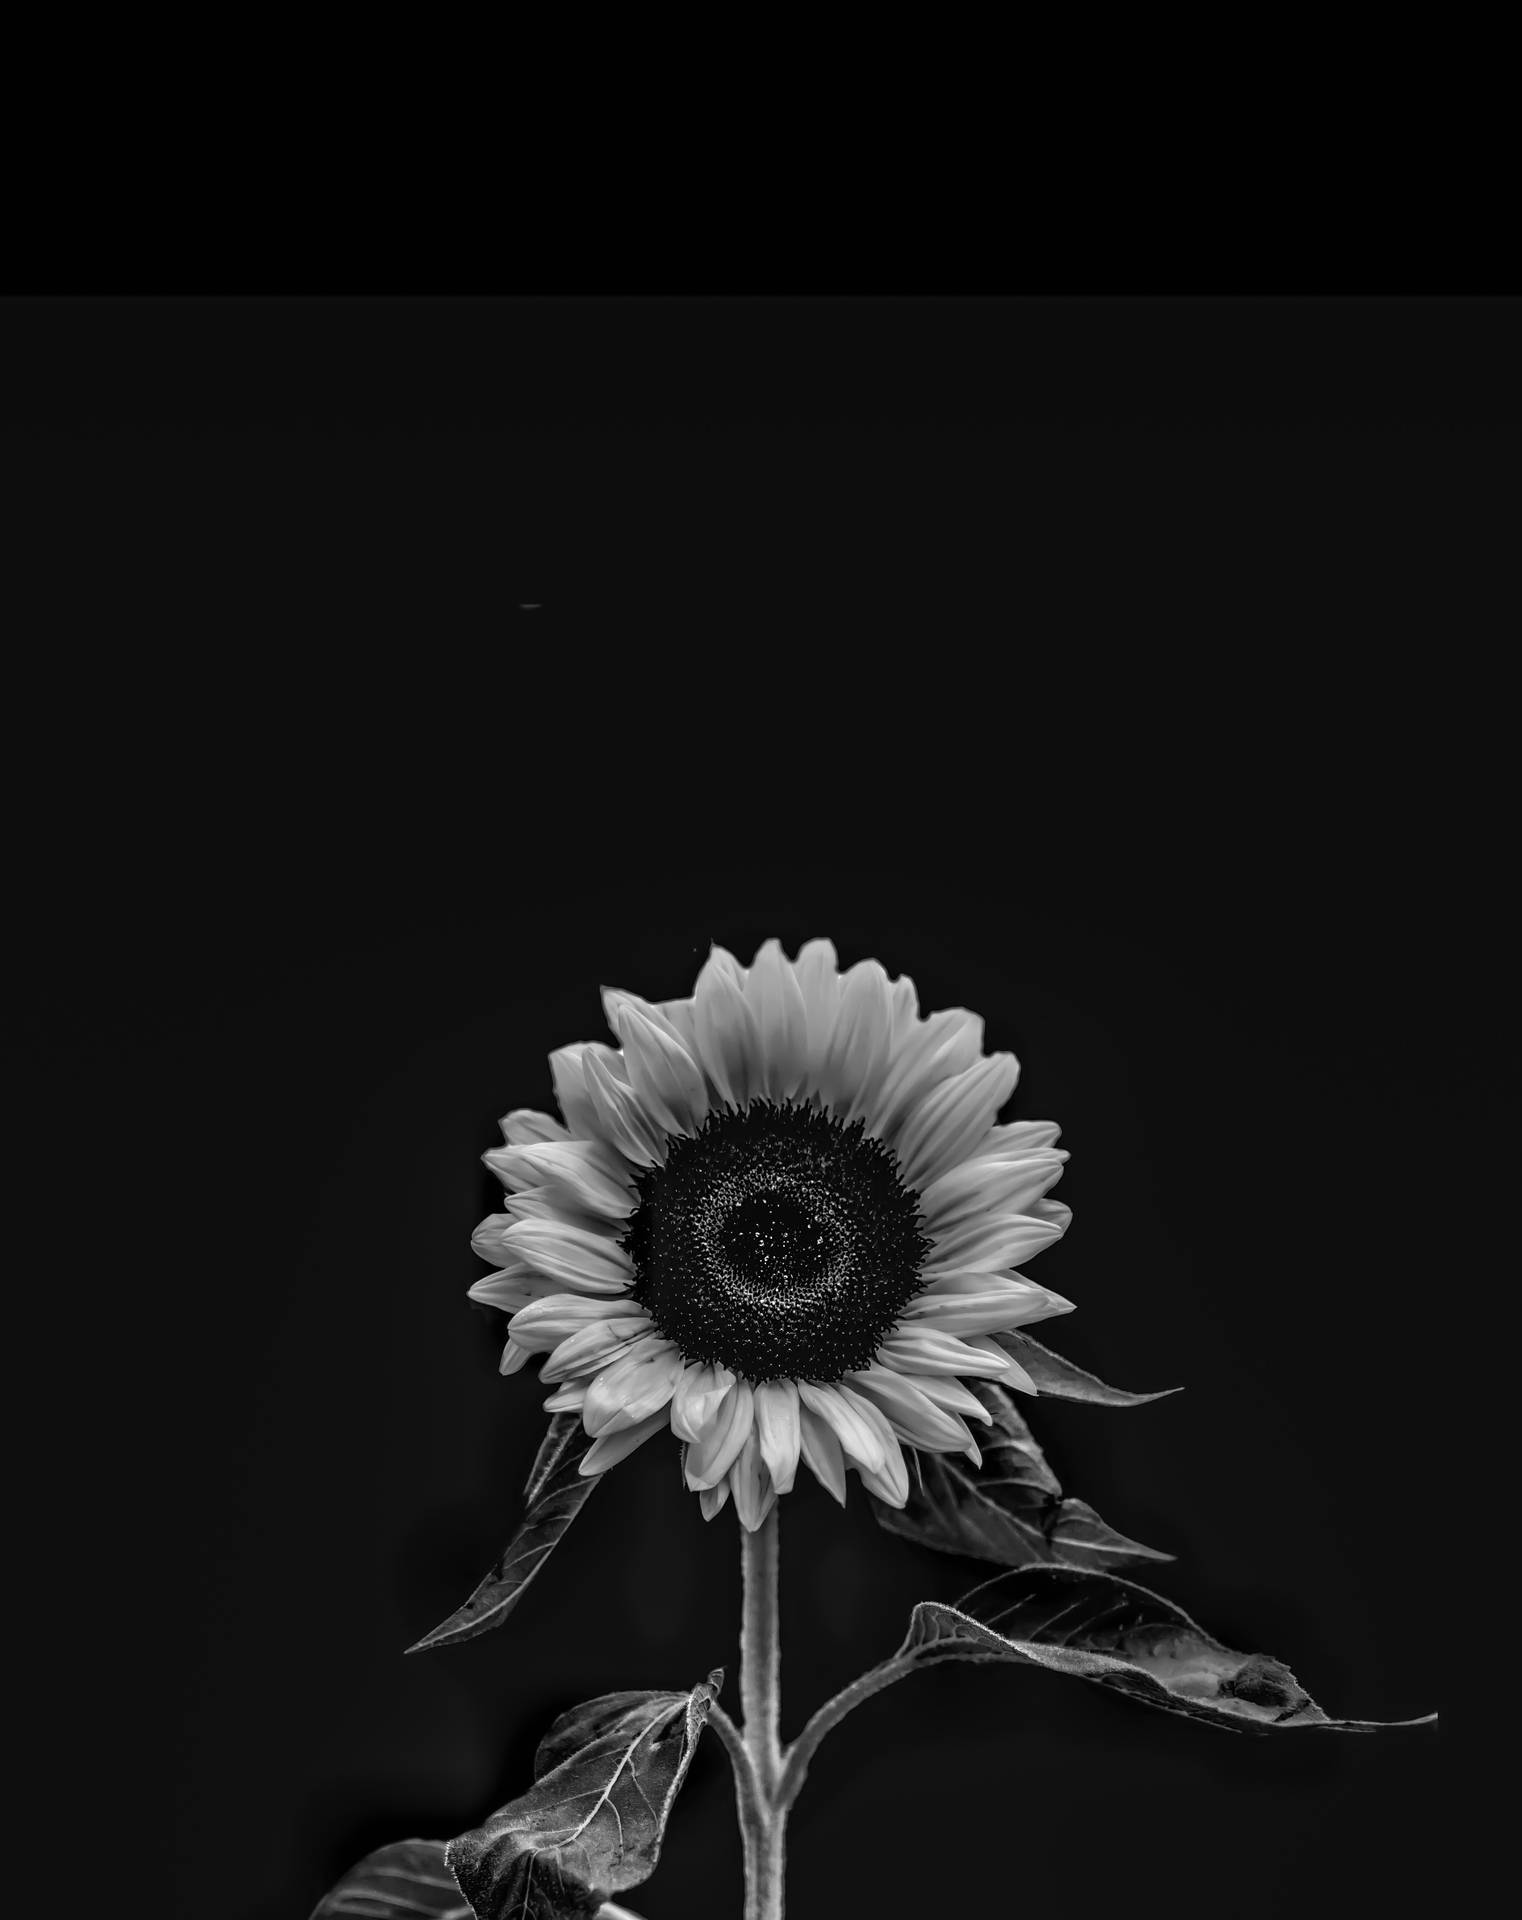 Remarkable 4k Iphone Wallpaper Featuring A Black And White Sunflower